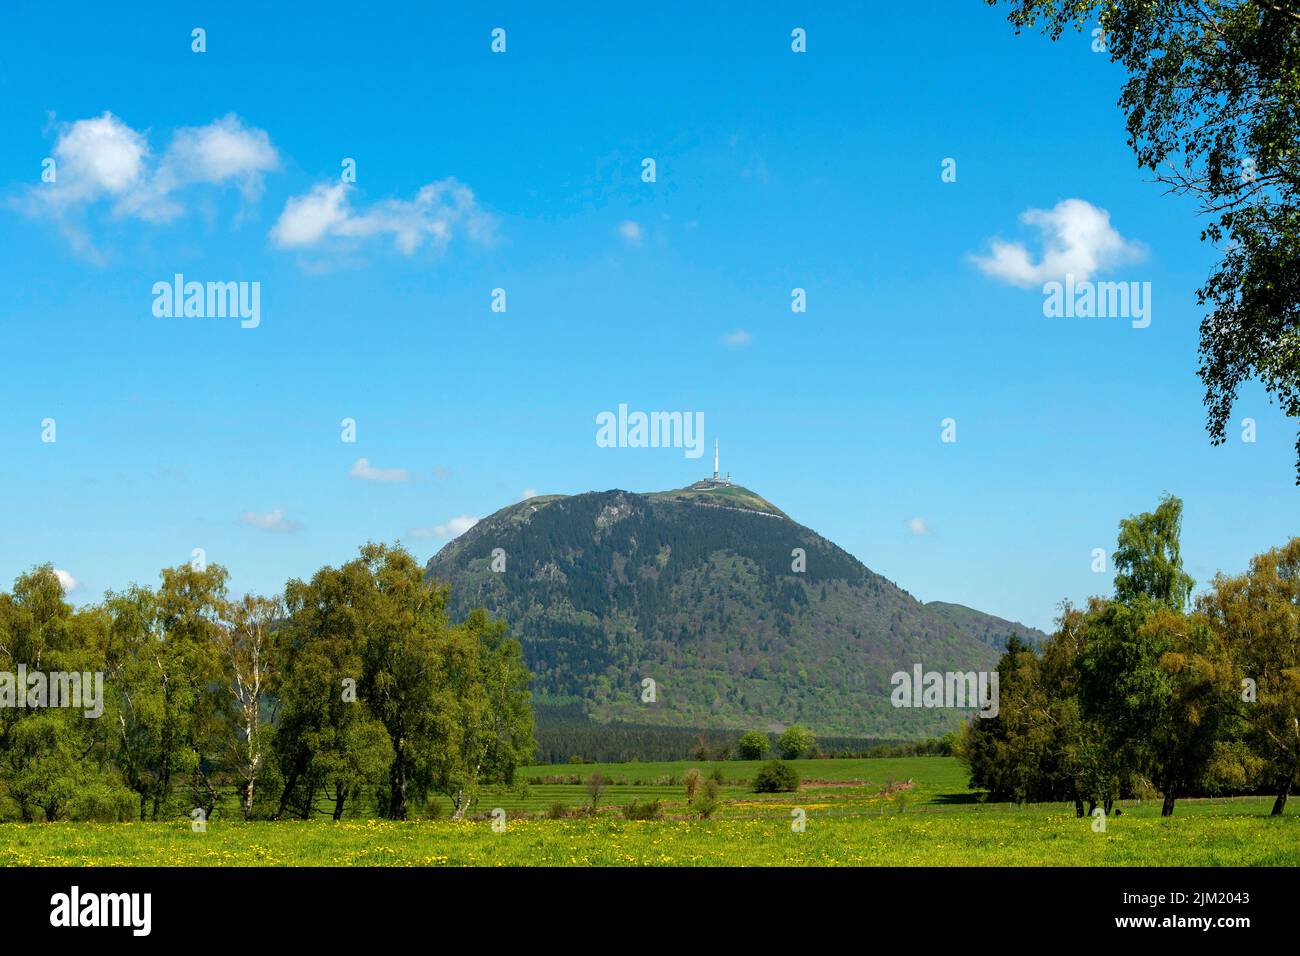 Puy de dome volcano. Natural regional park of Volcans d'Auvergne, Puy de Dome departement, Auvergne, France Stock Photo